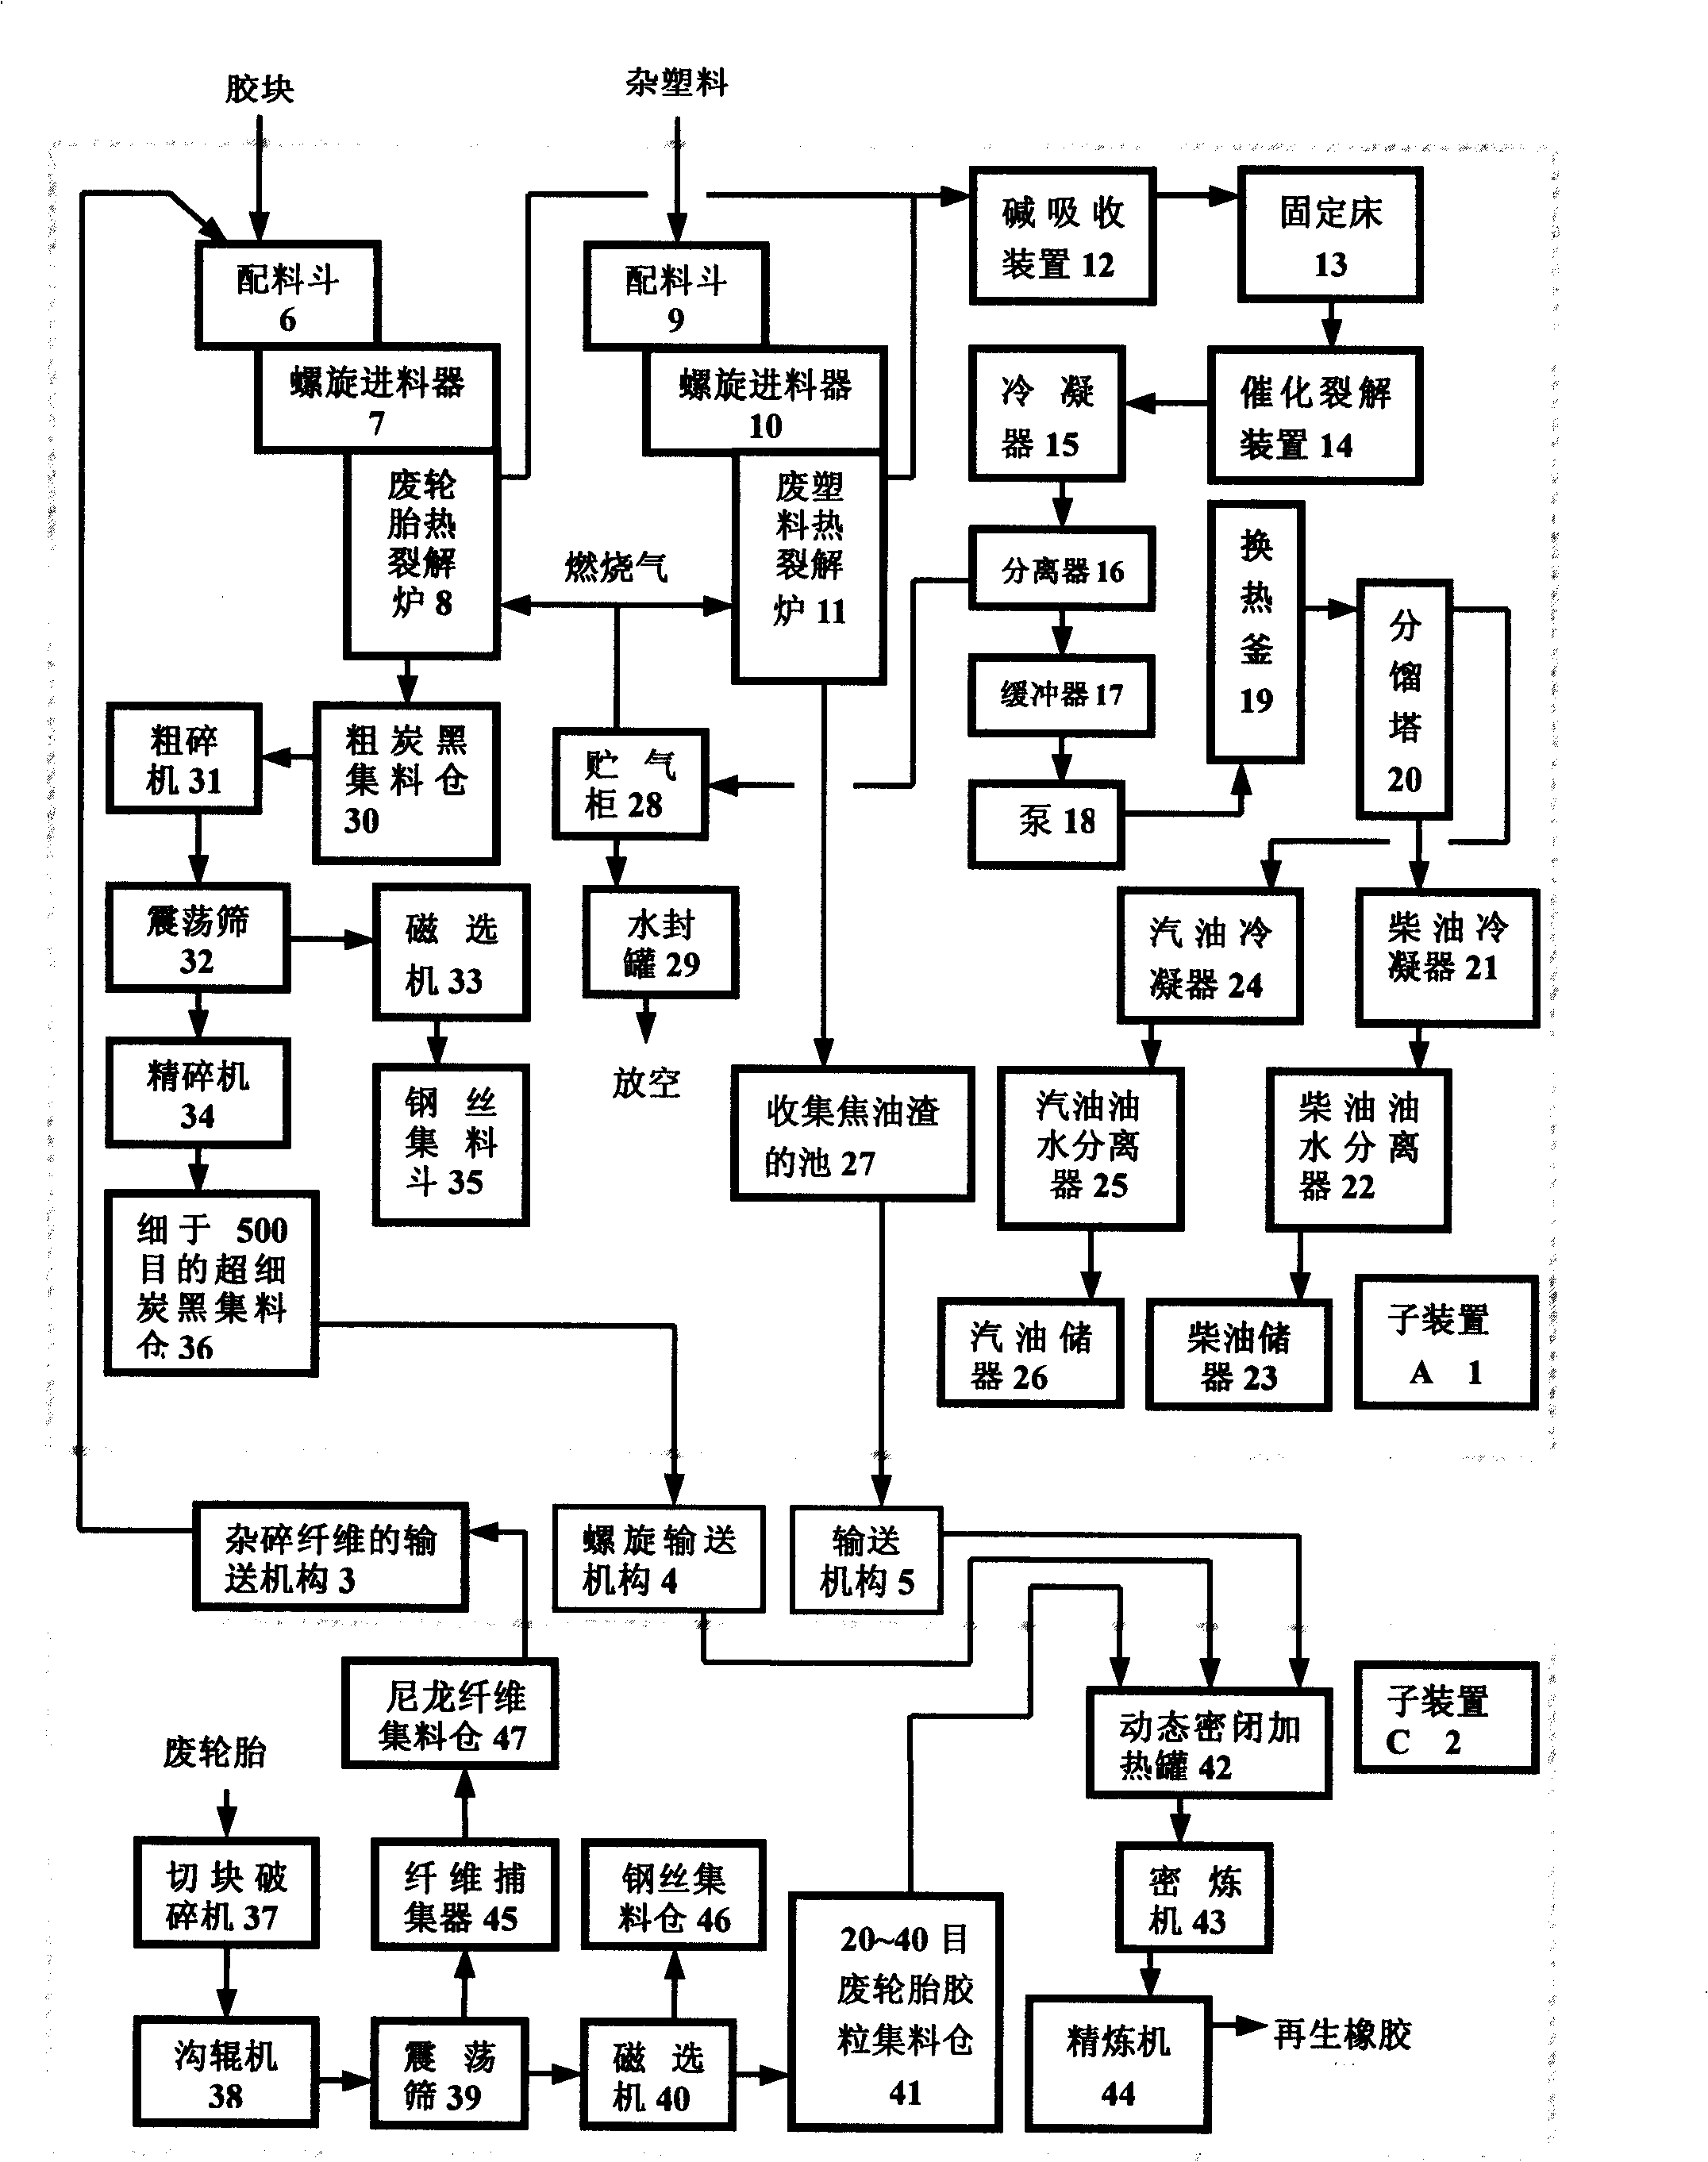 Method and apparatus for combination regeneration, or coproduction with hydrocarbon black of waste and old macromolecule material